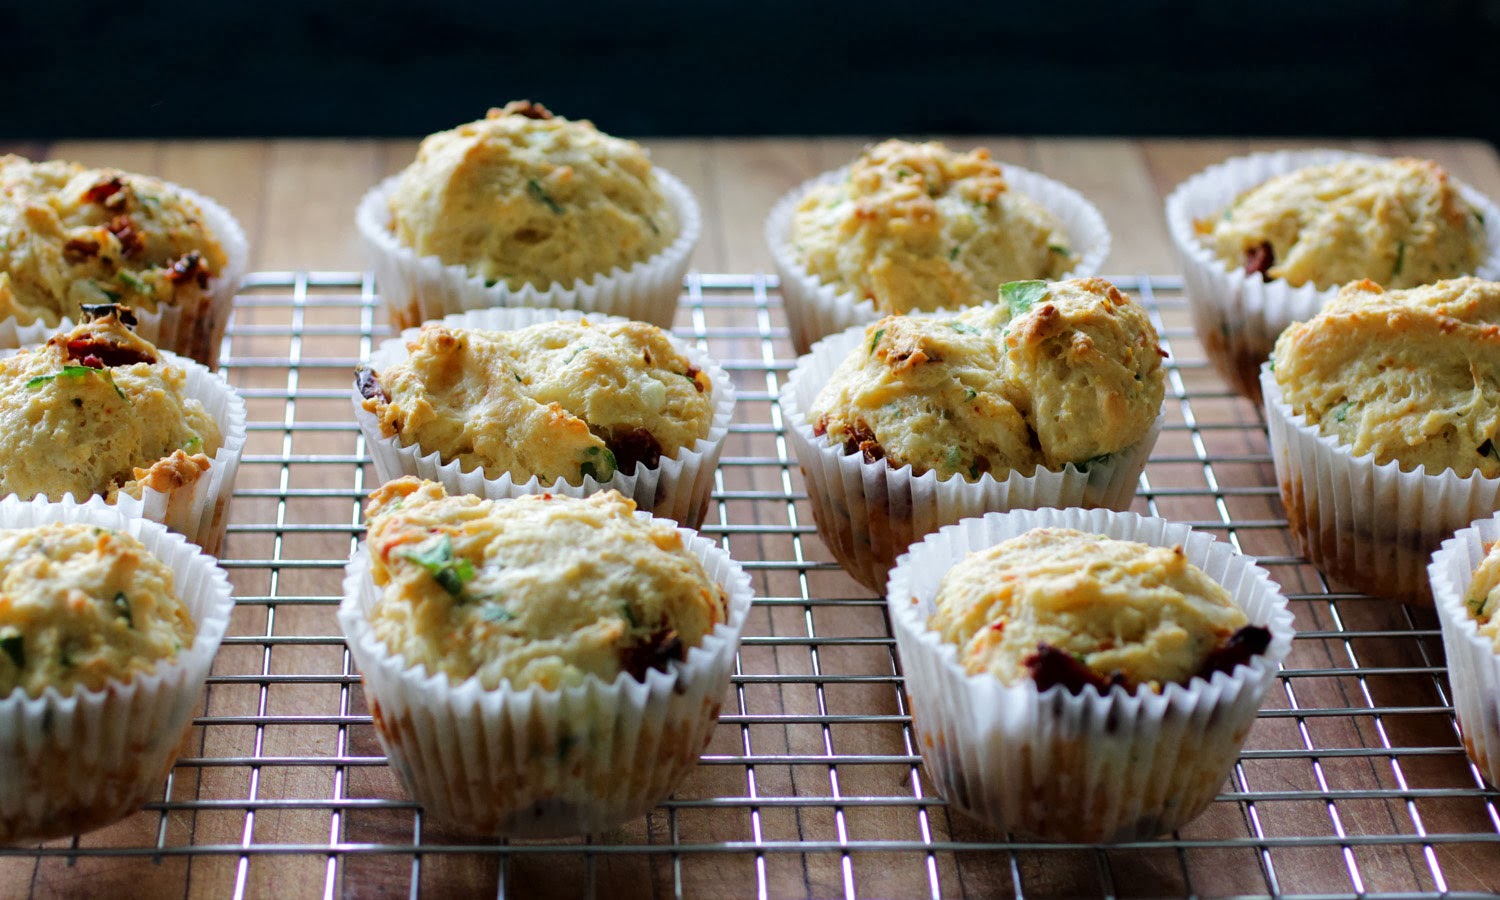 Simple Savory Sundried Tomato and Goat Cheese Muffins www.recipeficiton.com